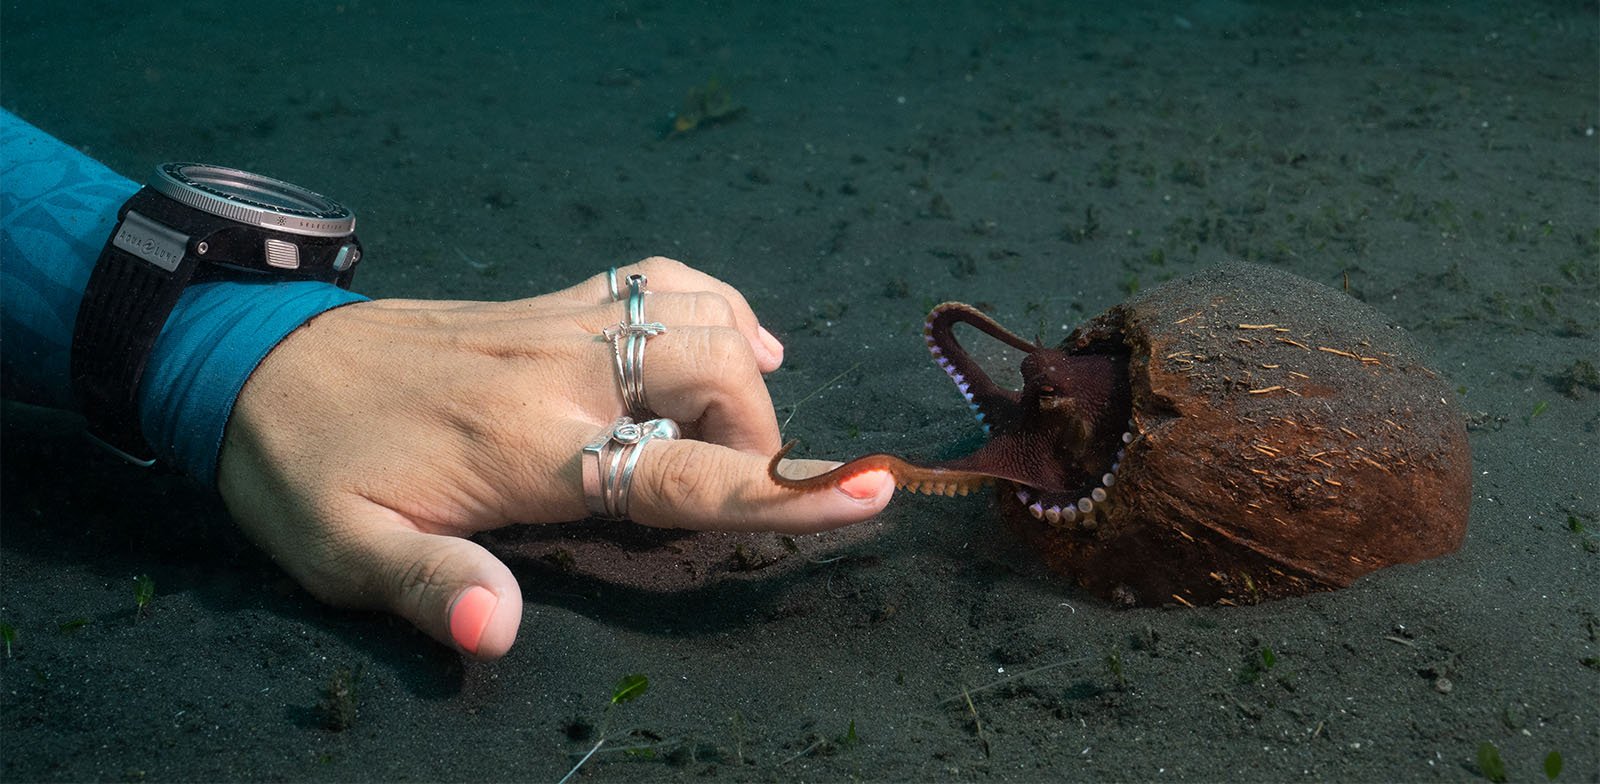 A human hand with rings touches the tentacle of a small coconut octopus on a sandy seabed, illustrating a unique interaction between human and marine life.